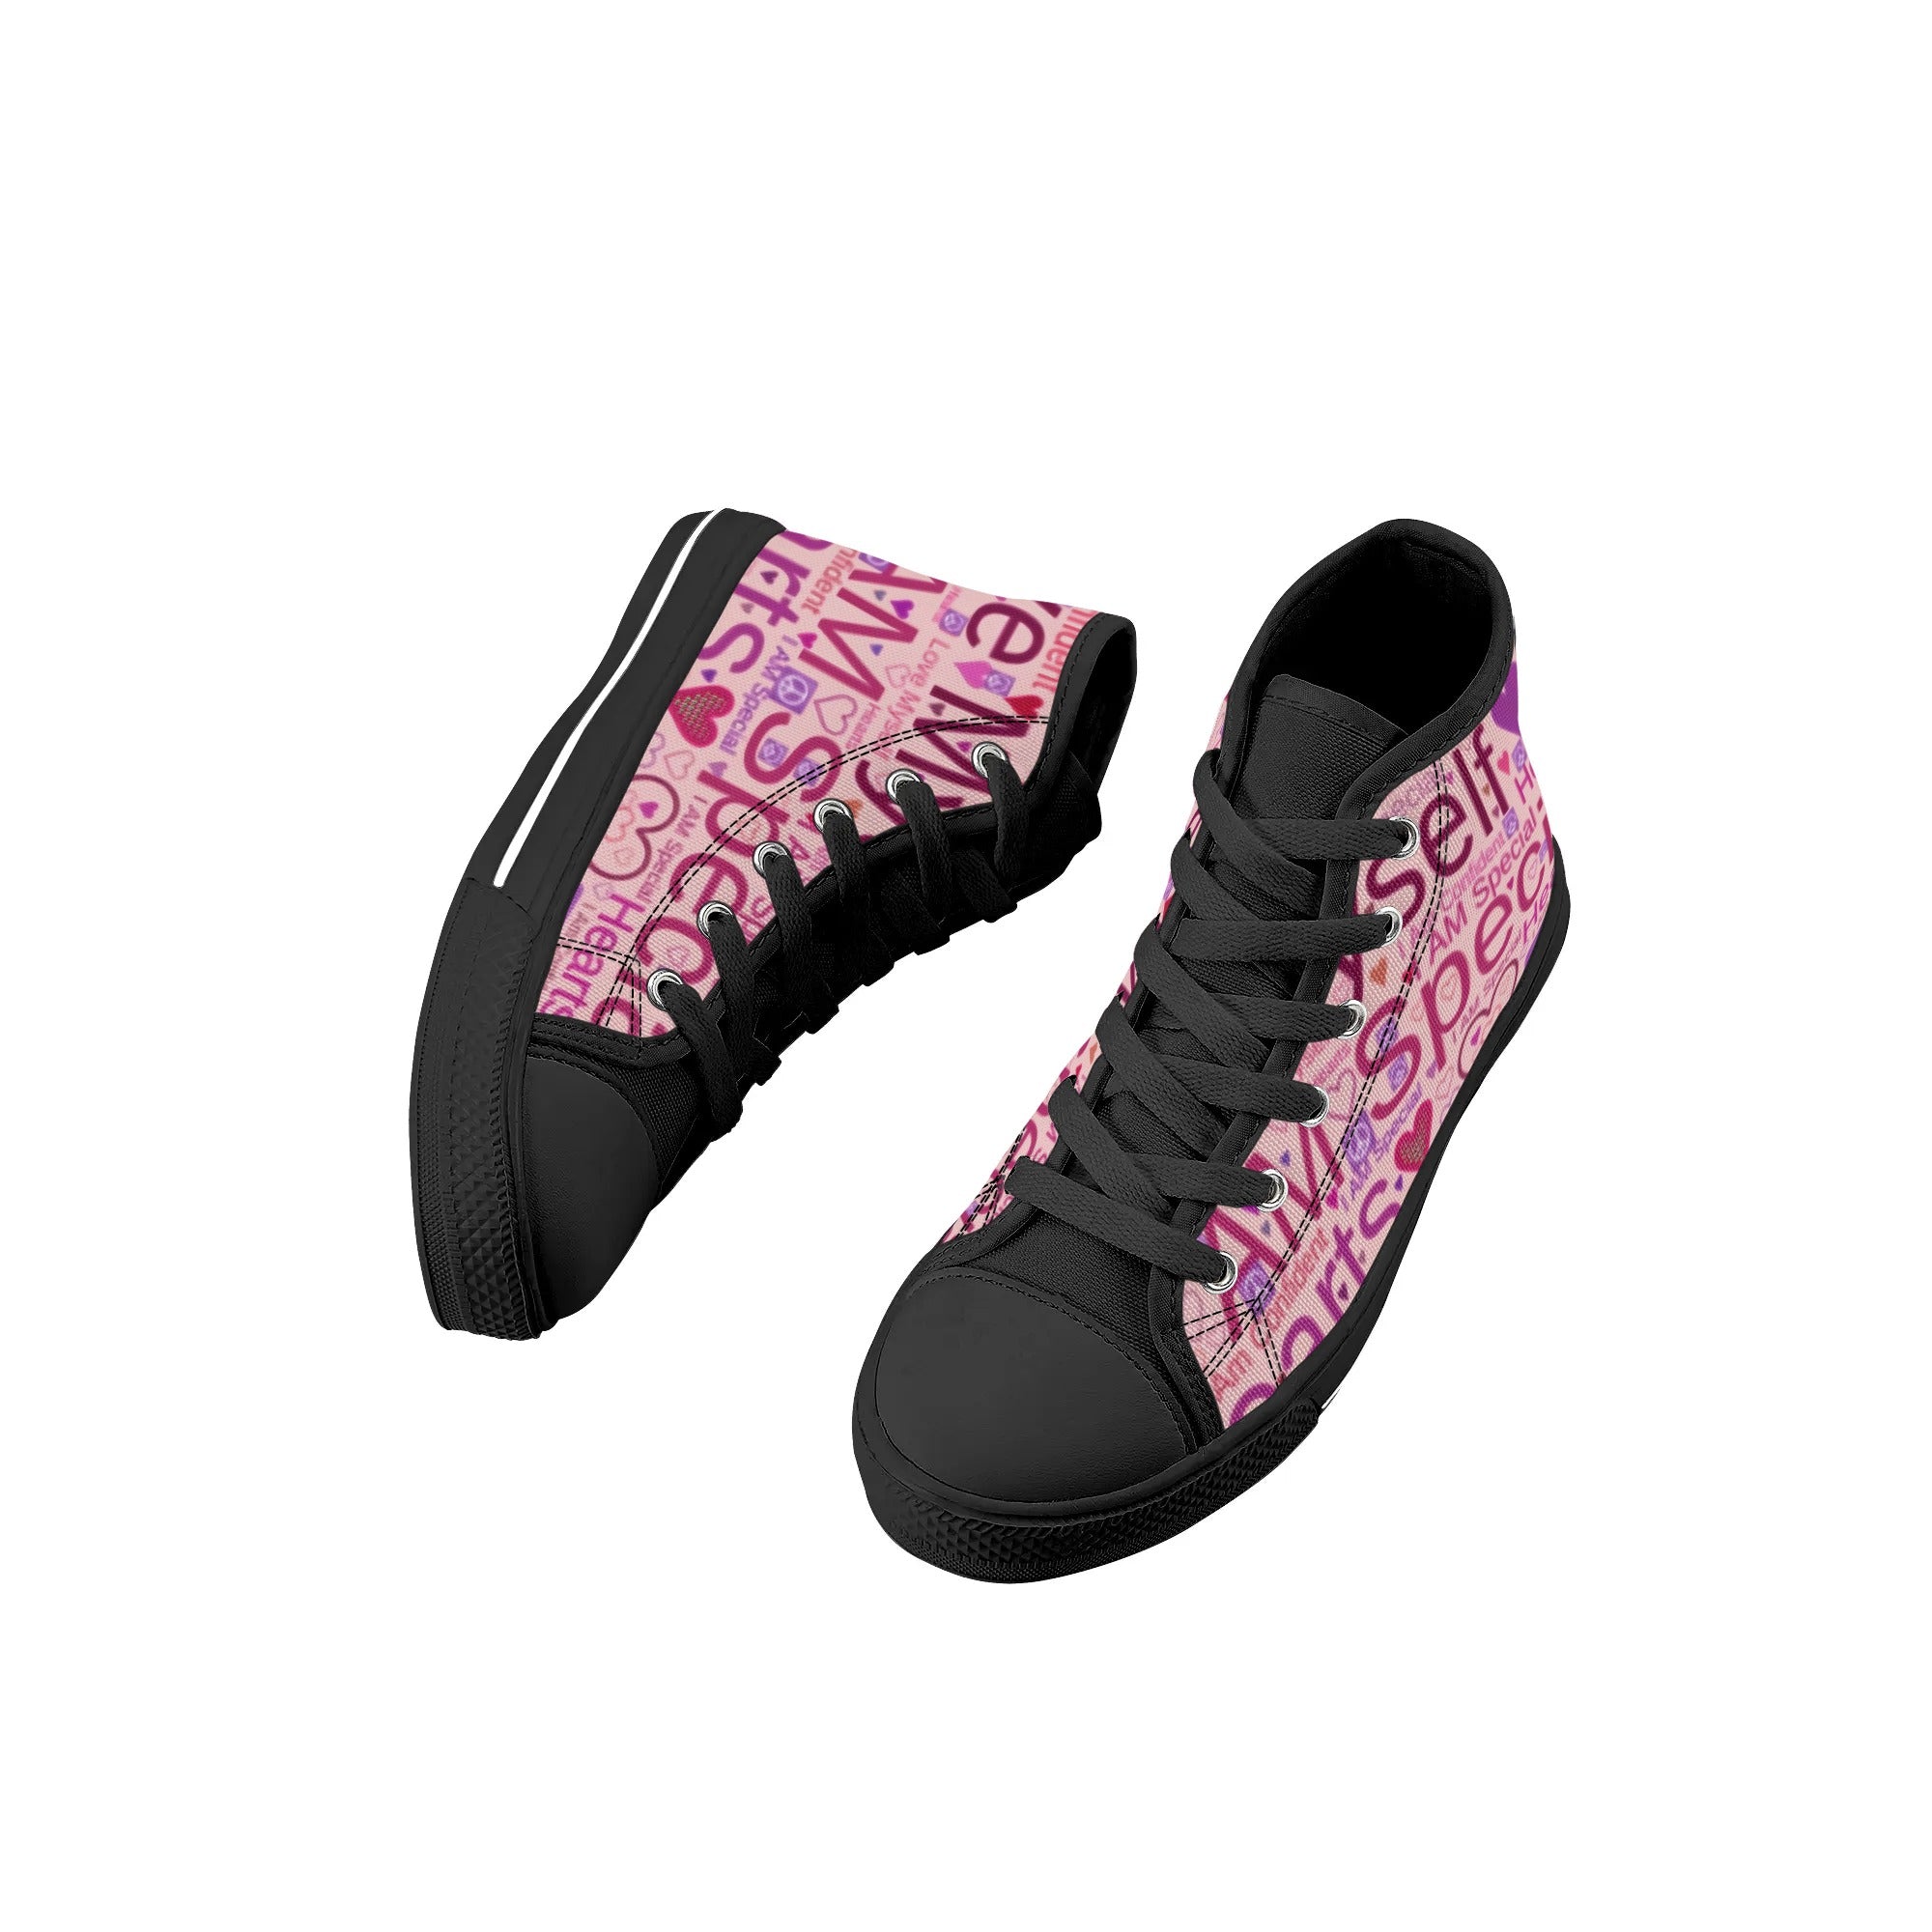 Black - Speak-Over Kids Rubber High Top Canvas Shoes - Kids Shoes at TFC&H Co.